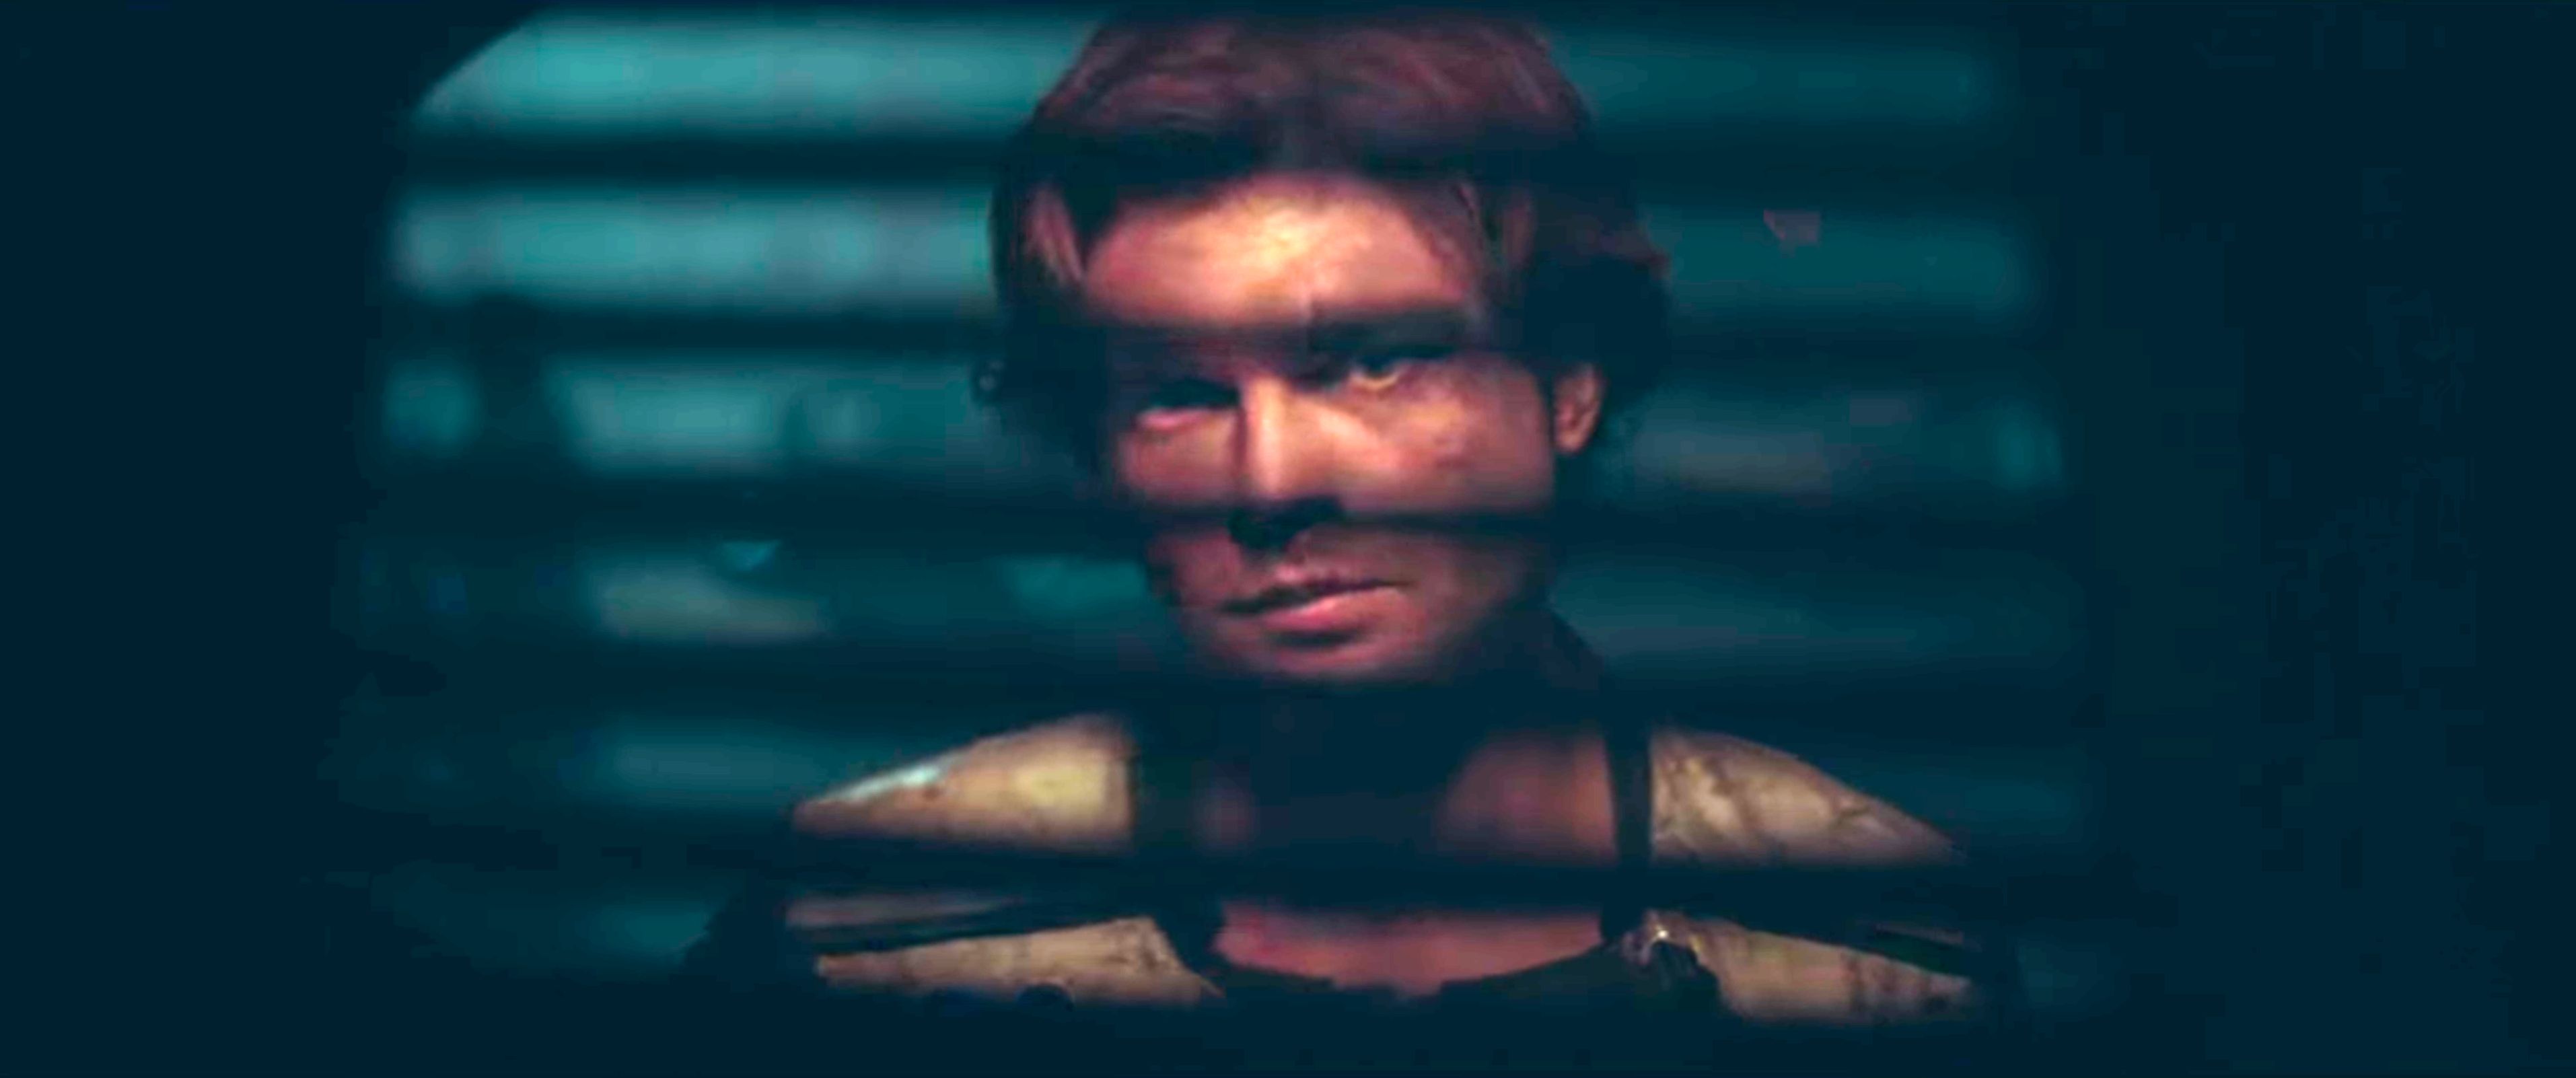 Solo: A Star Wars Story photo 1